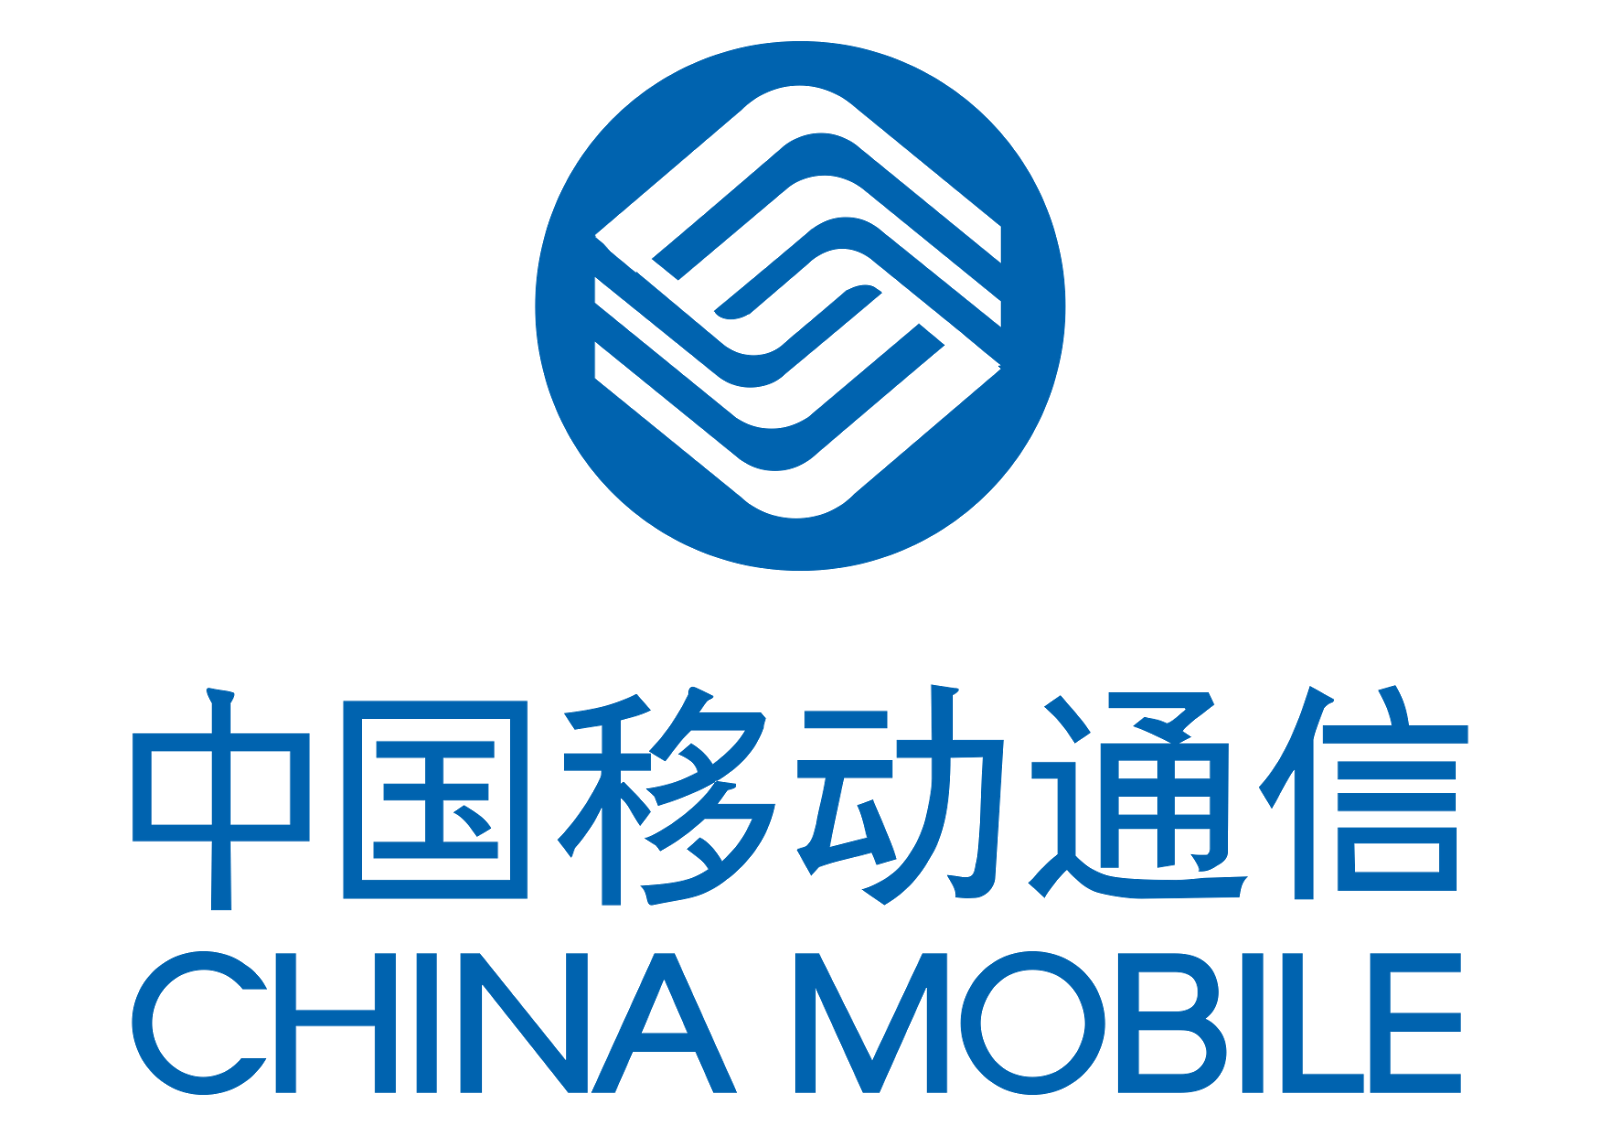 China Mobile Logo Vector - China Mobile, Transparent background PNG HD thumbnail